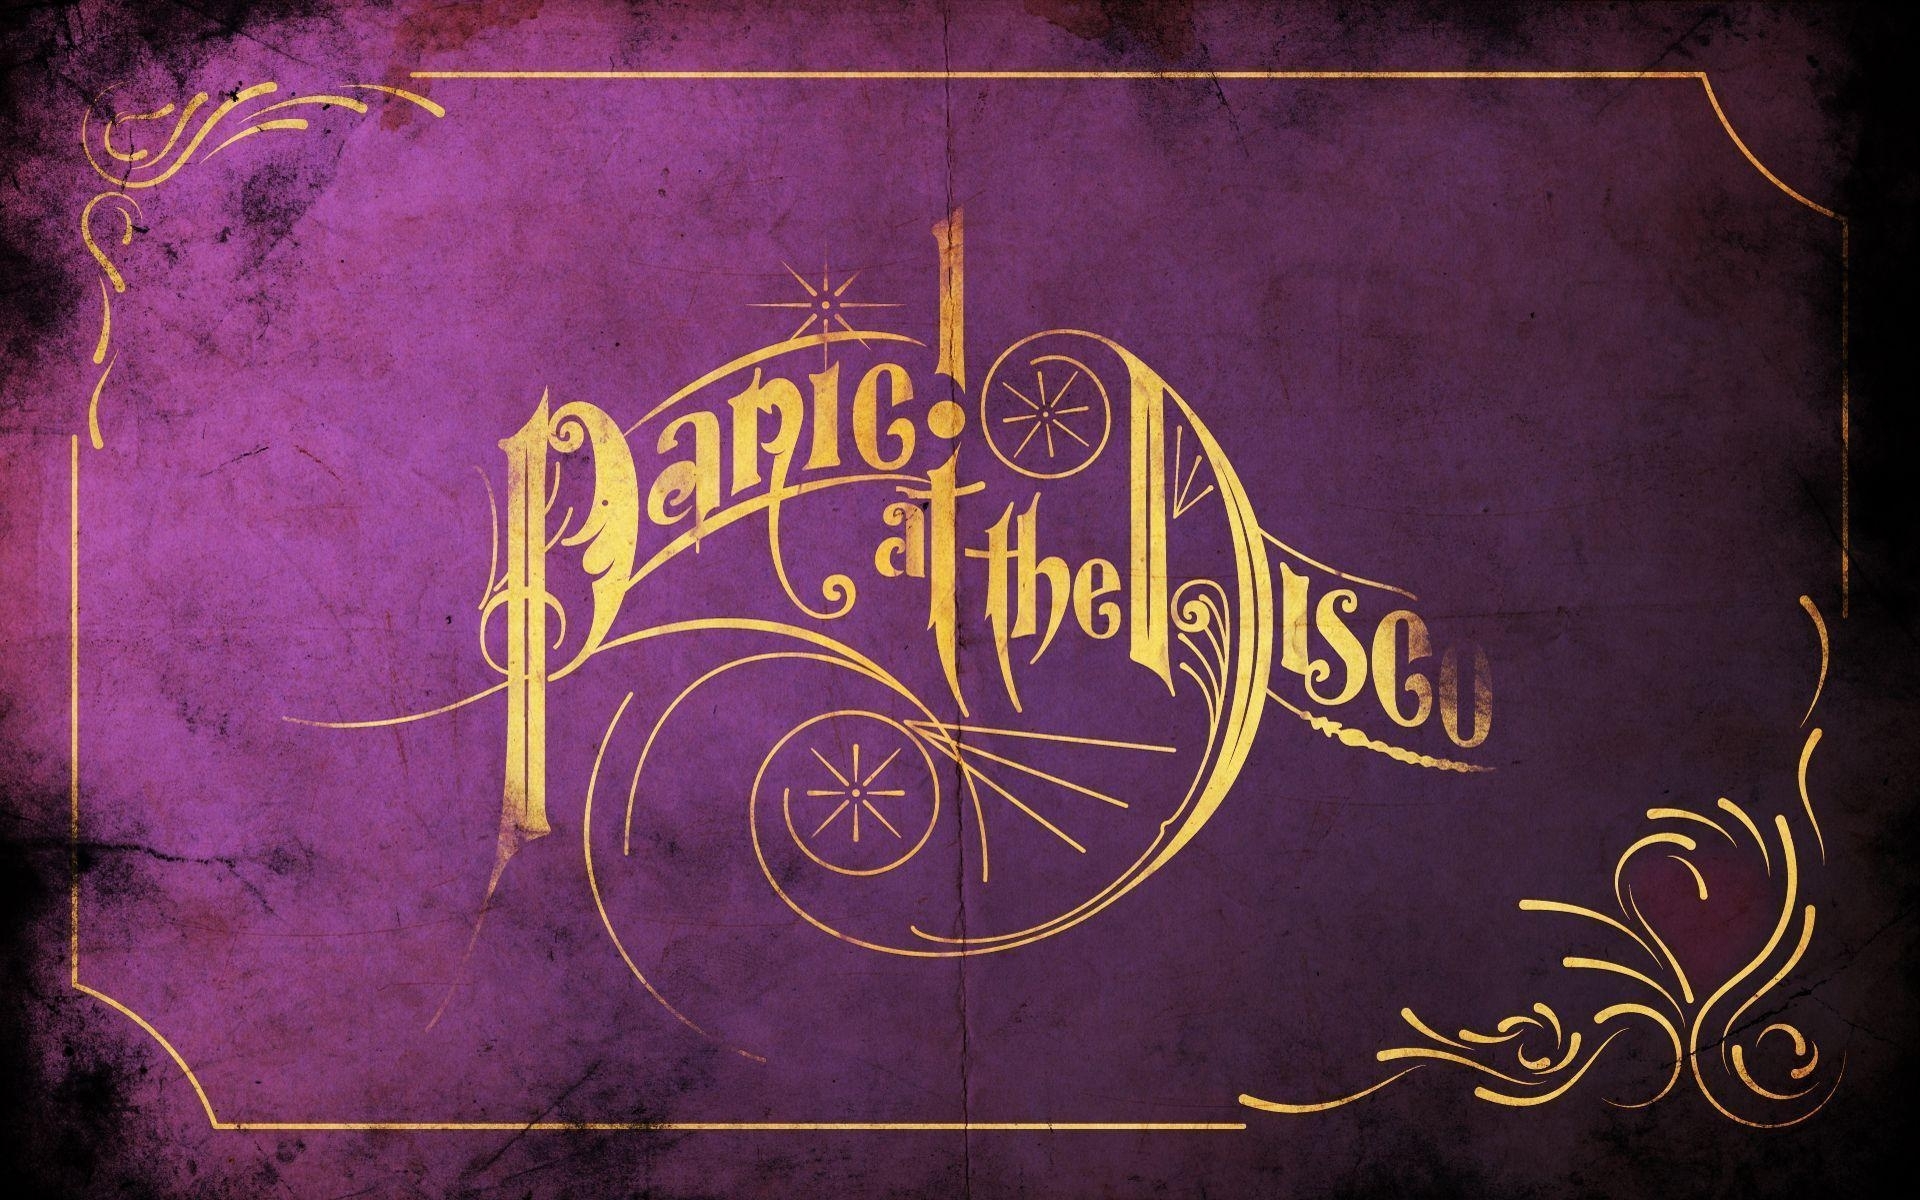 panic! at the disco wallpapers - wallpaper cave